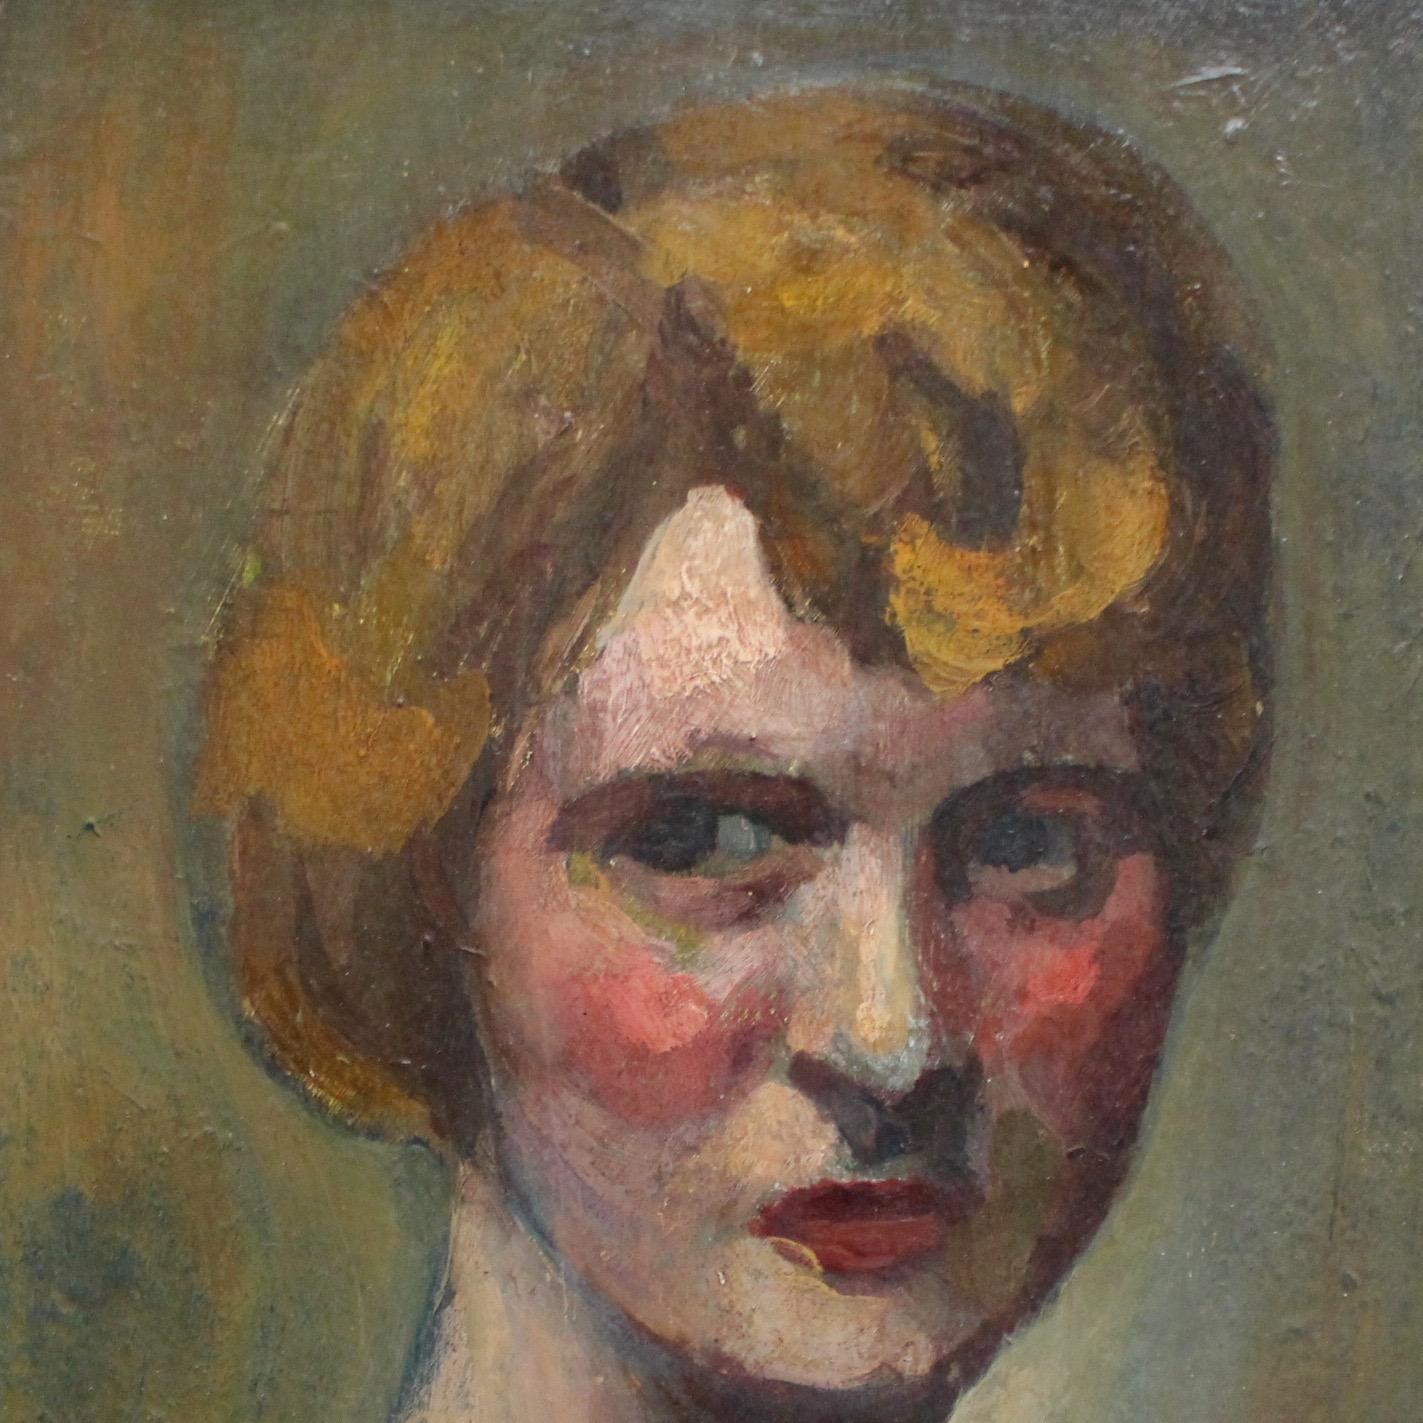 'Portrait of Earnest Woman', oil on board (c. 1930s) by unknown artist, most likely French. It's strange that this portrait was unsigned - we'll never know who created this painting. Discovered in the south of France, the quality and execution of